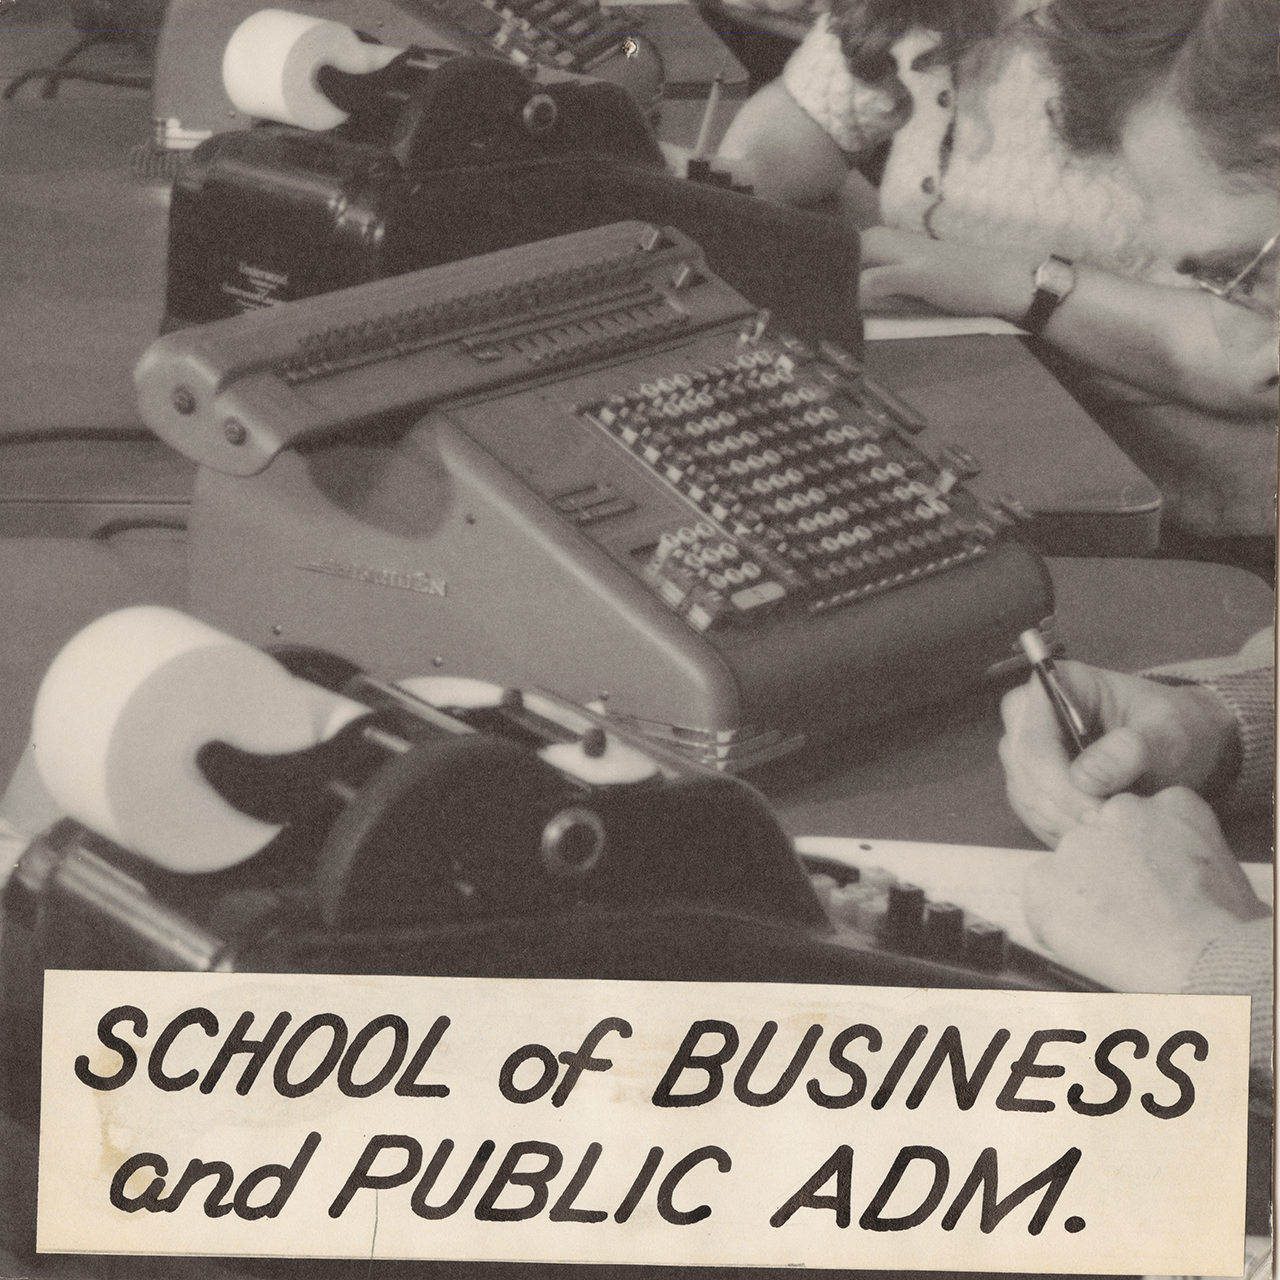 Old adding machine - School of Business and Public Administration.